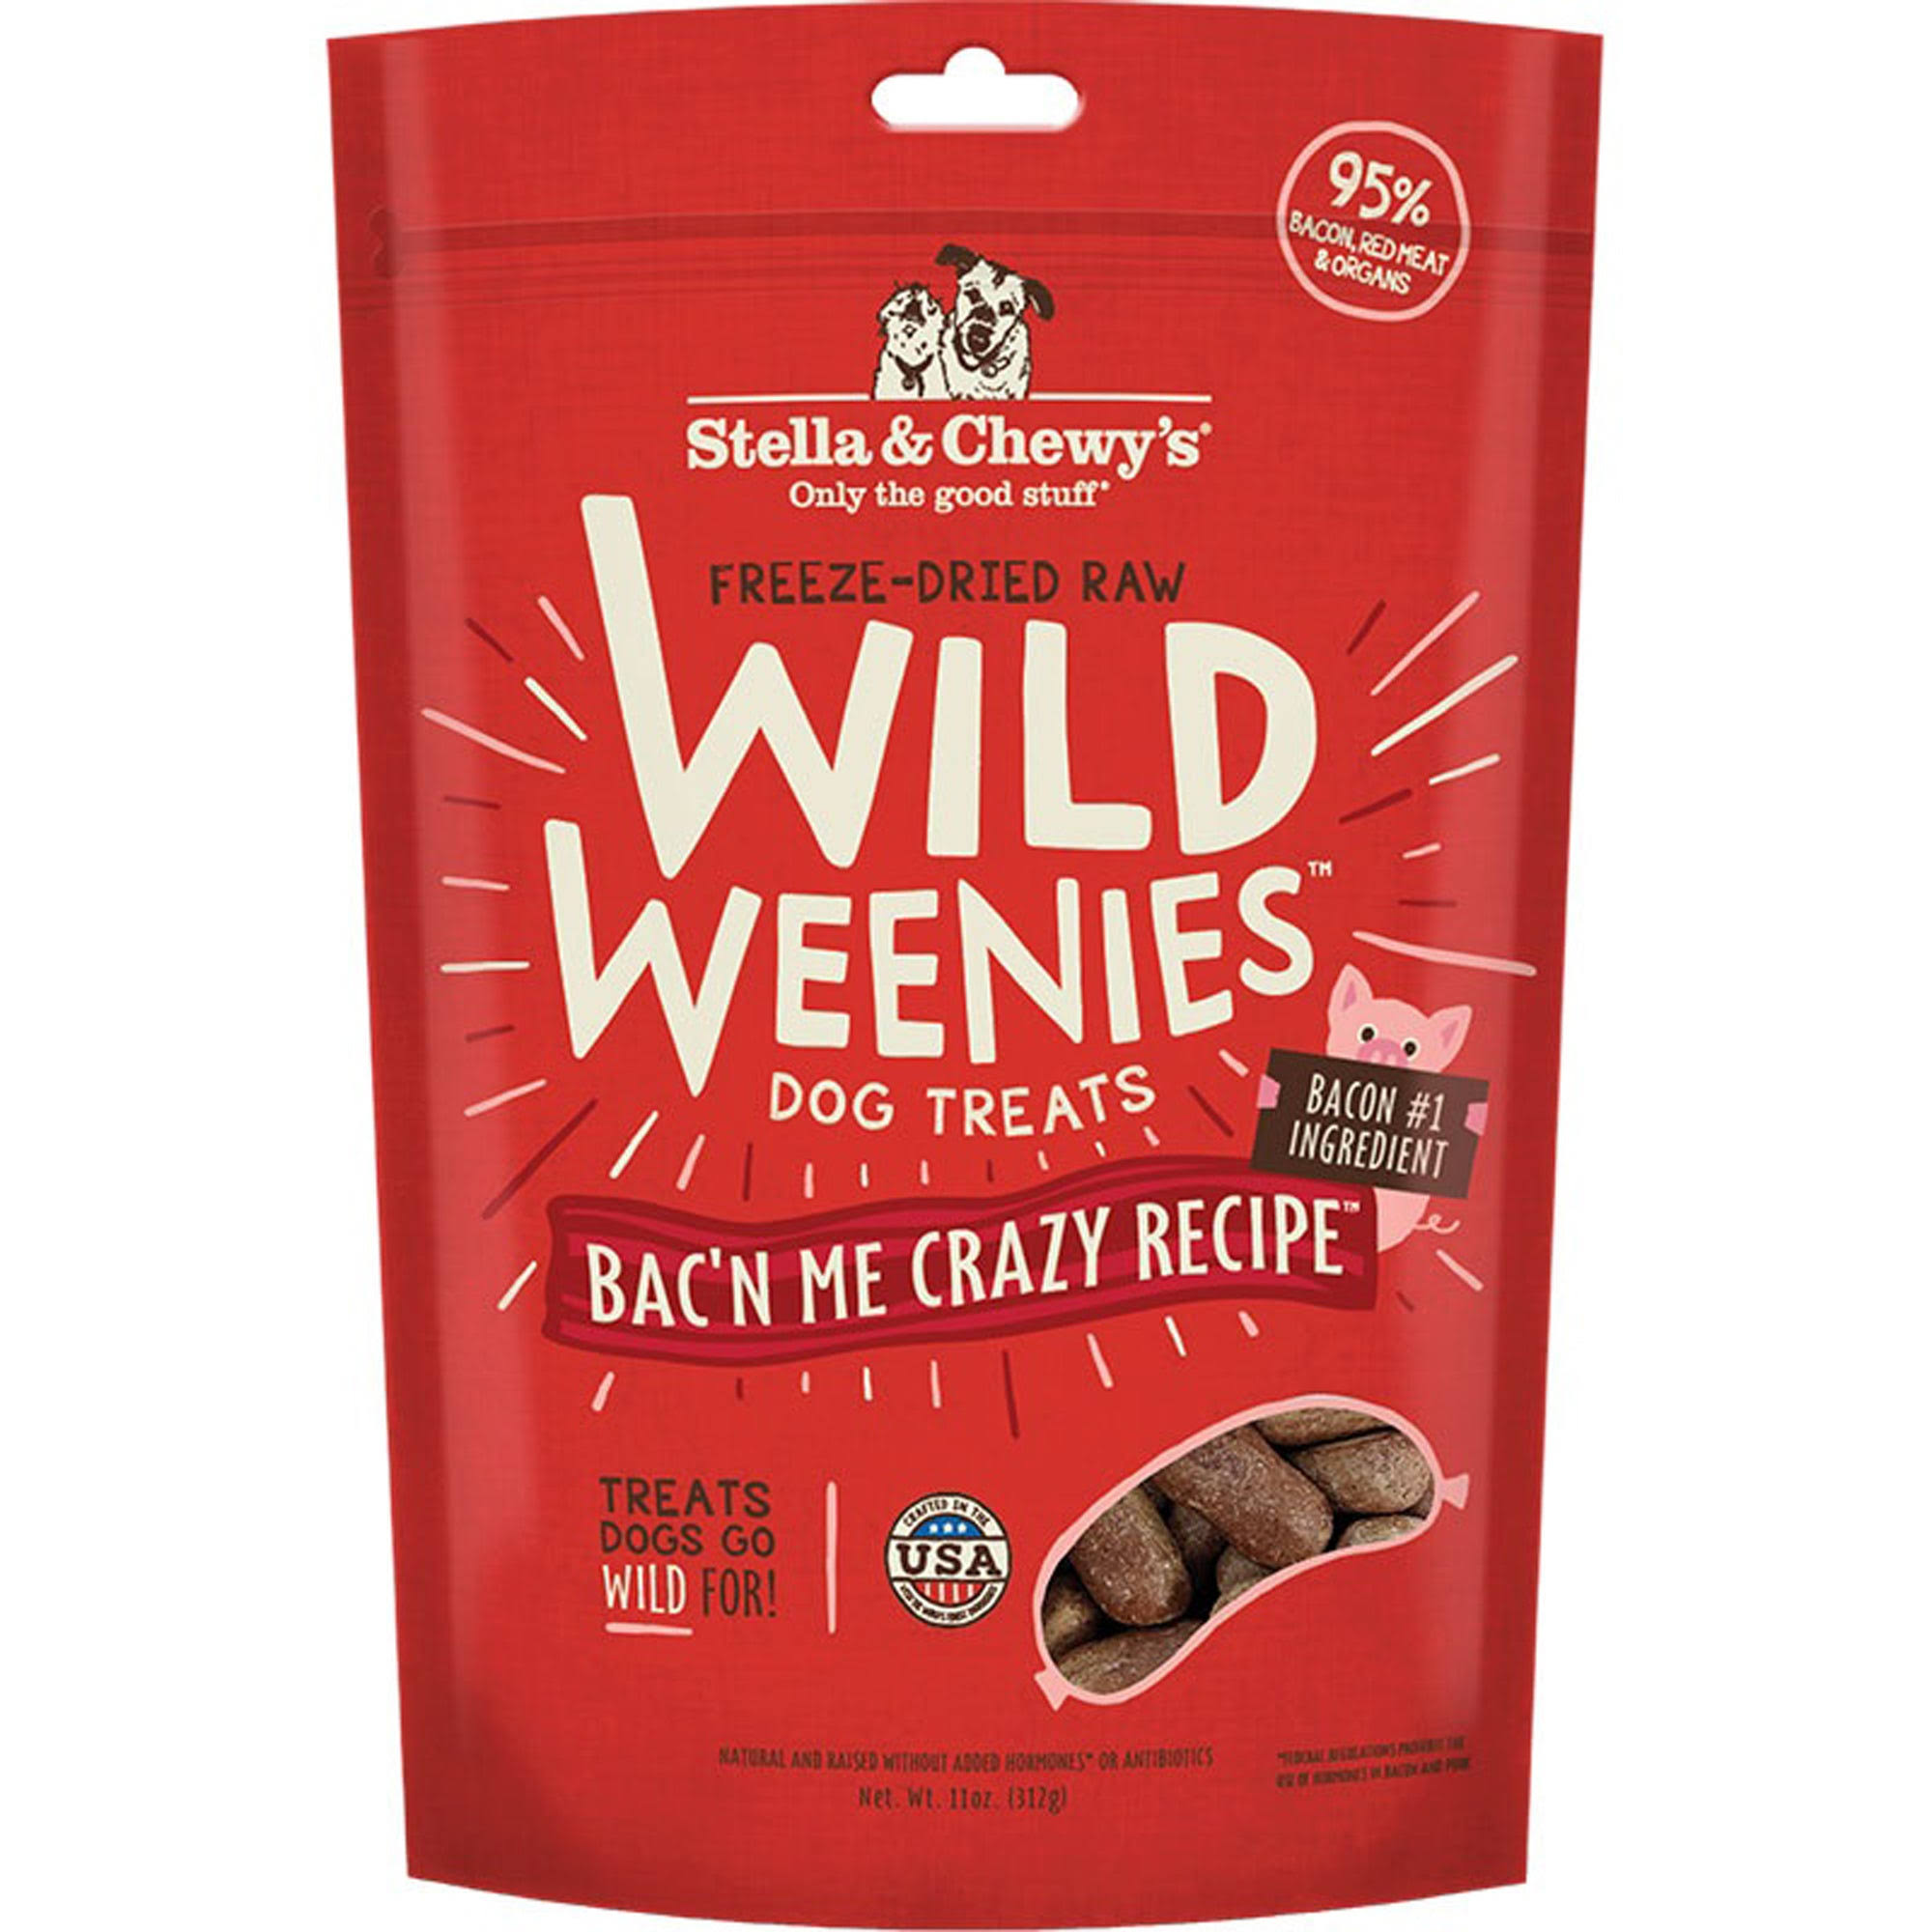 Stella & Chewy’s Freeze-Dried Raw Wild Weenies Dog Treats – All-Natural, Protein Rich, Grain Free Dog & Puppy Treat – Great For Training & Rewarding –